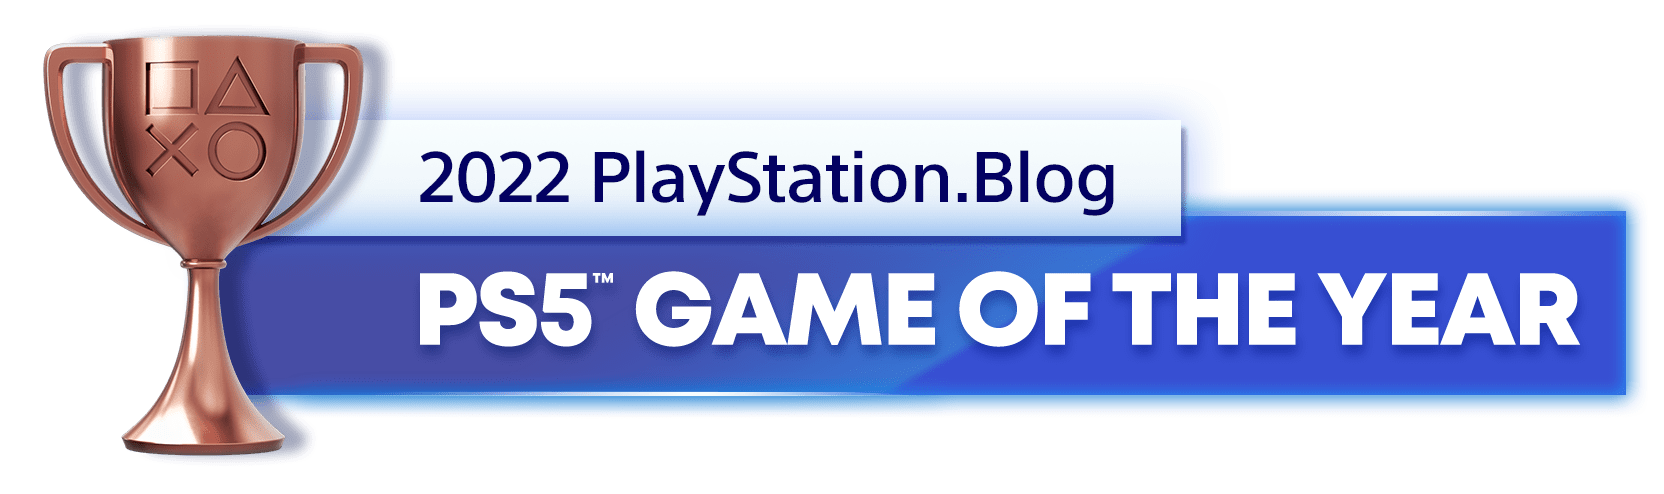 PlayStation Blog's 2022 Bronze trophy for PS5 game of the year